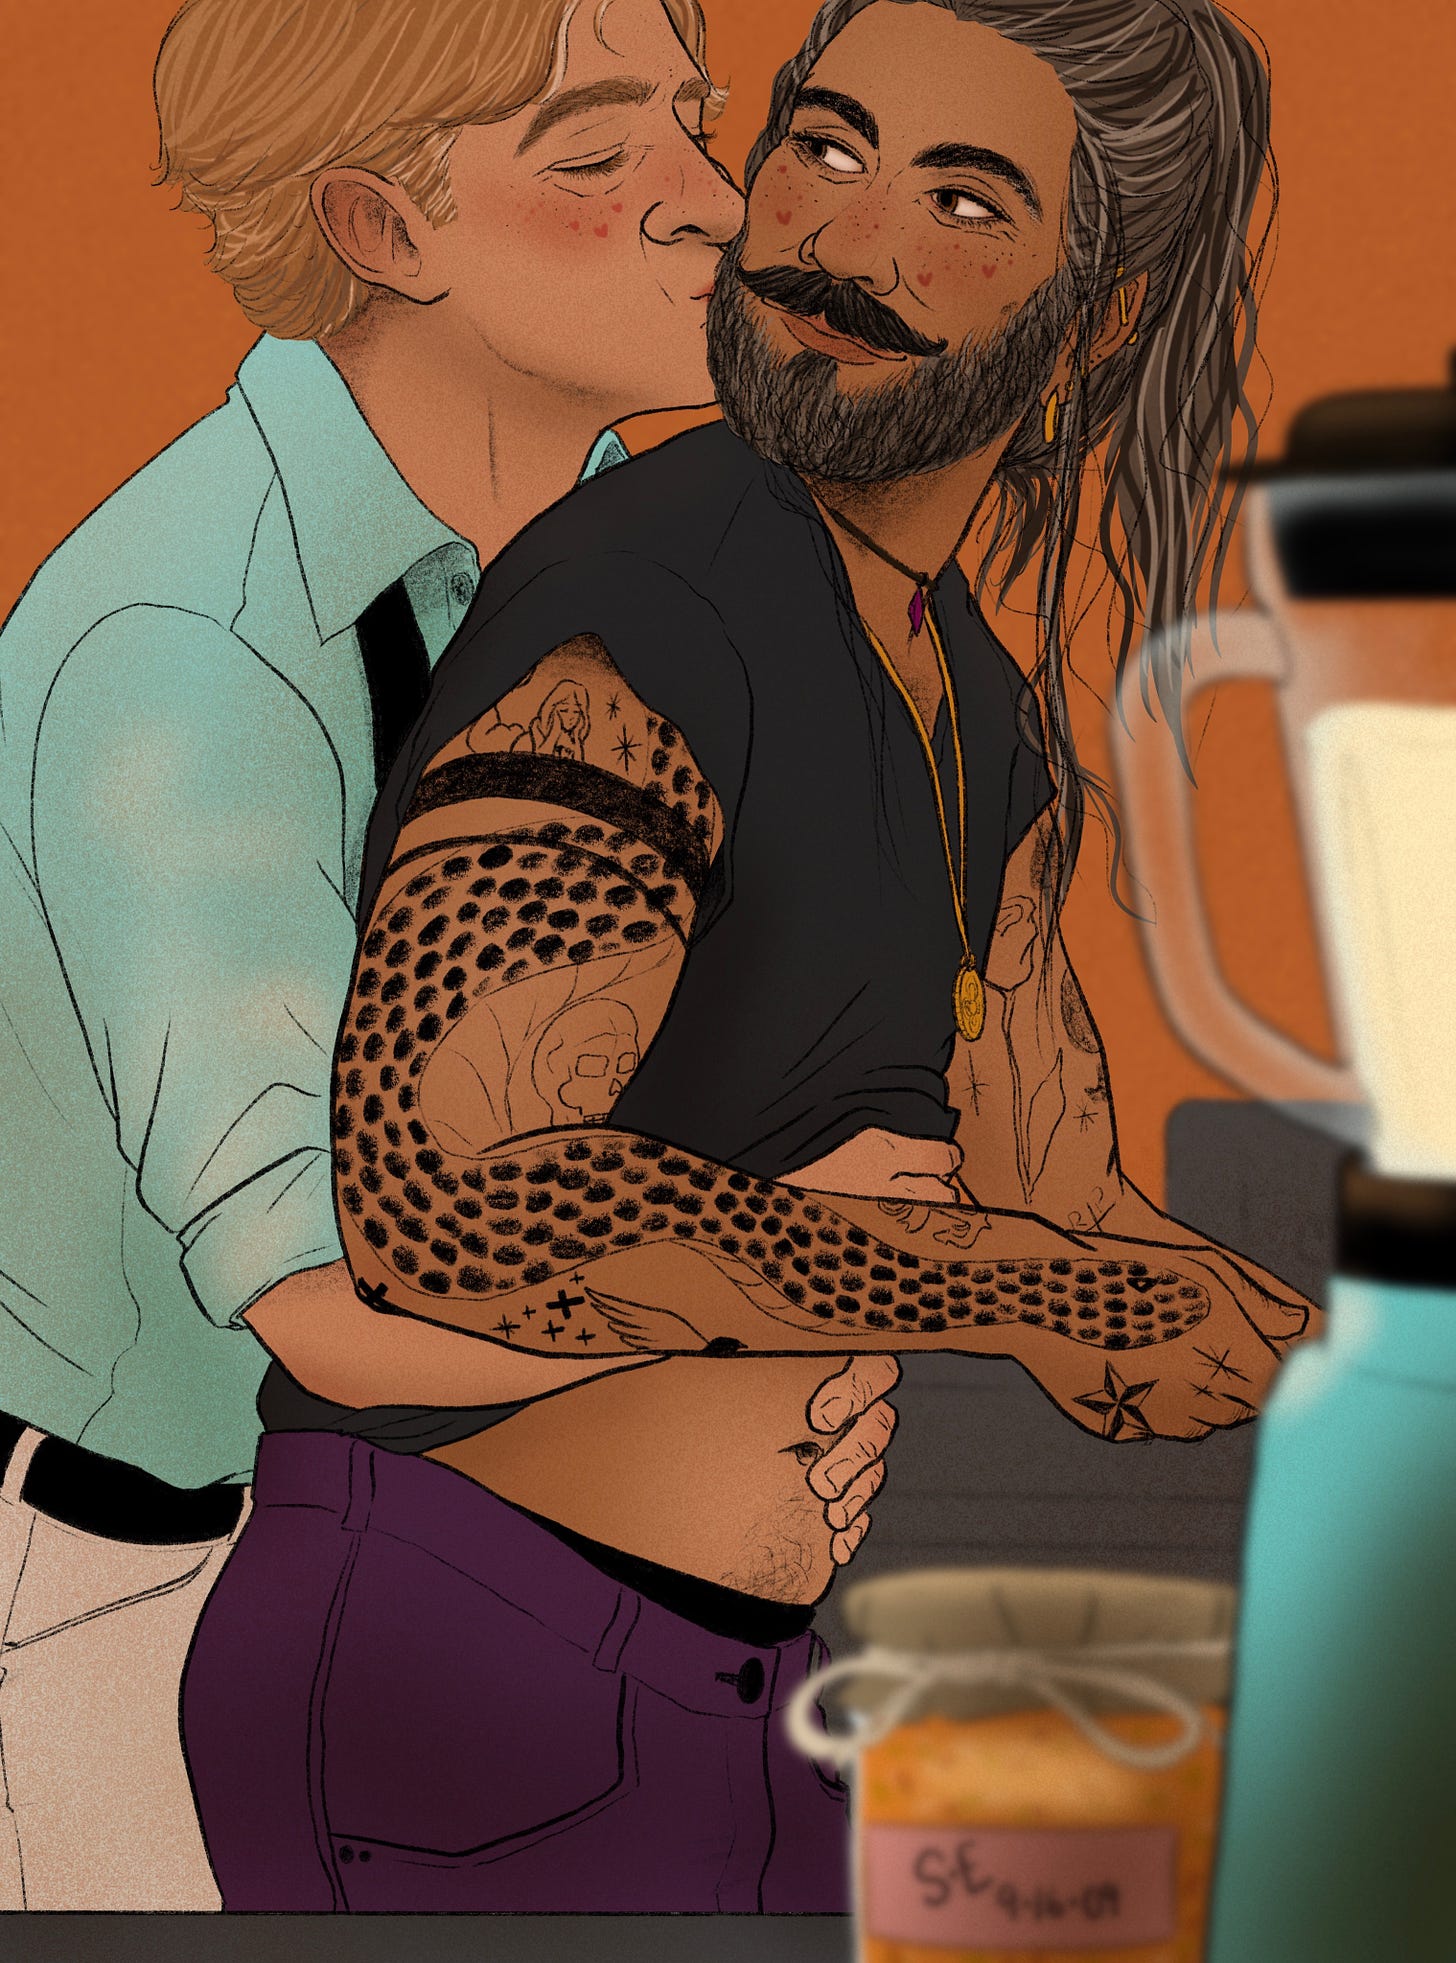 Stede and Ed in a modern AU (Pina Coladas by faeeebaeee on AO3). Stede is behind Ed in their kitchen, giving him a kiss on the cheek.